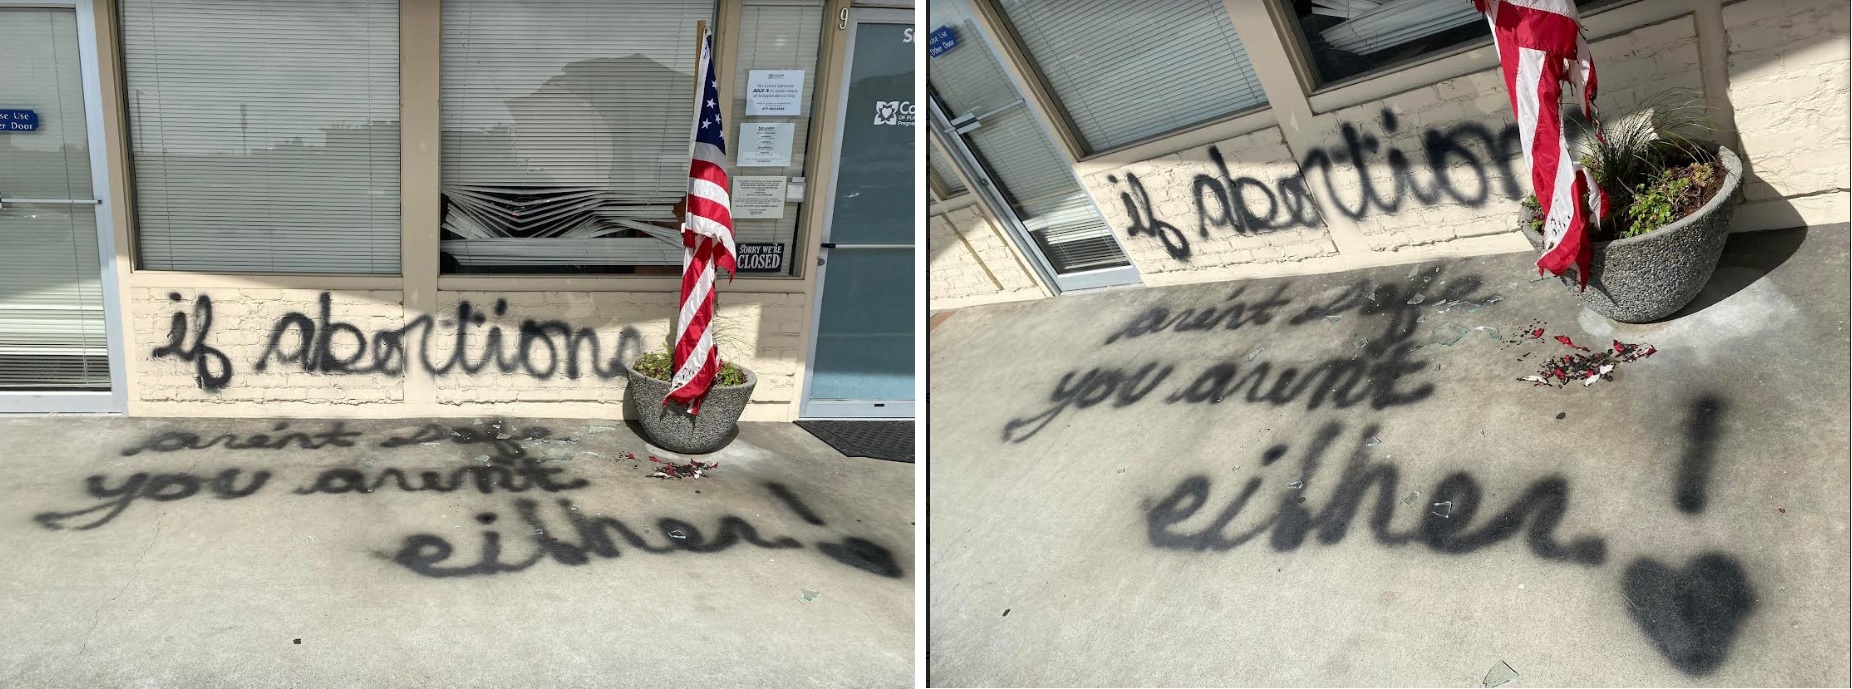 Image: Care Net of Puget Sound Kenmore WA center vandalized with burnt flag